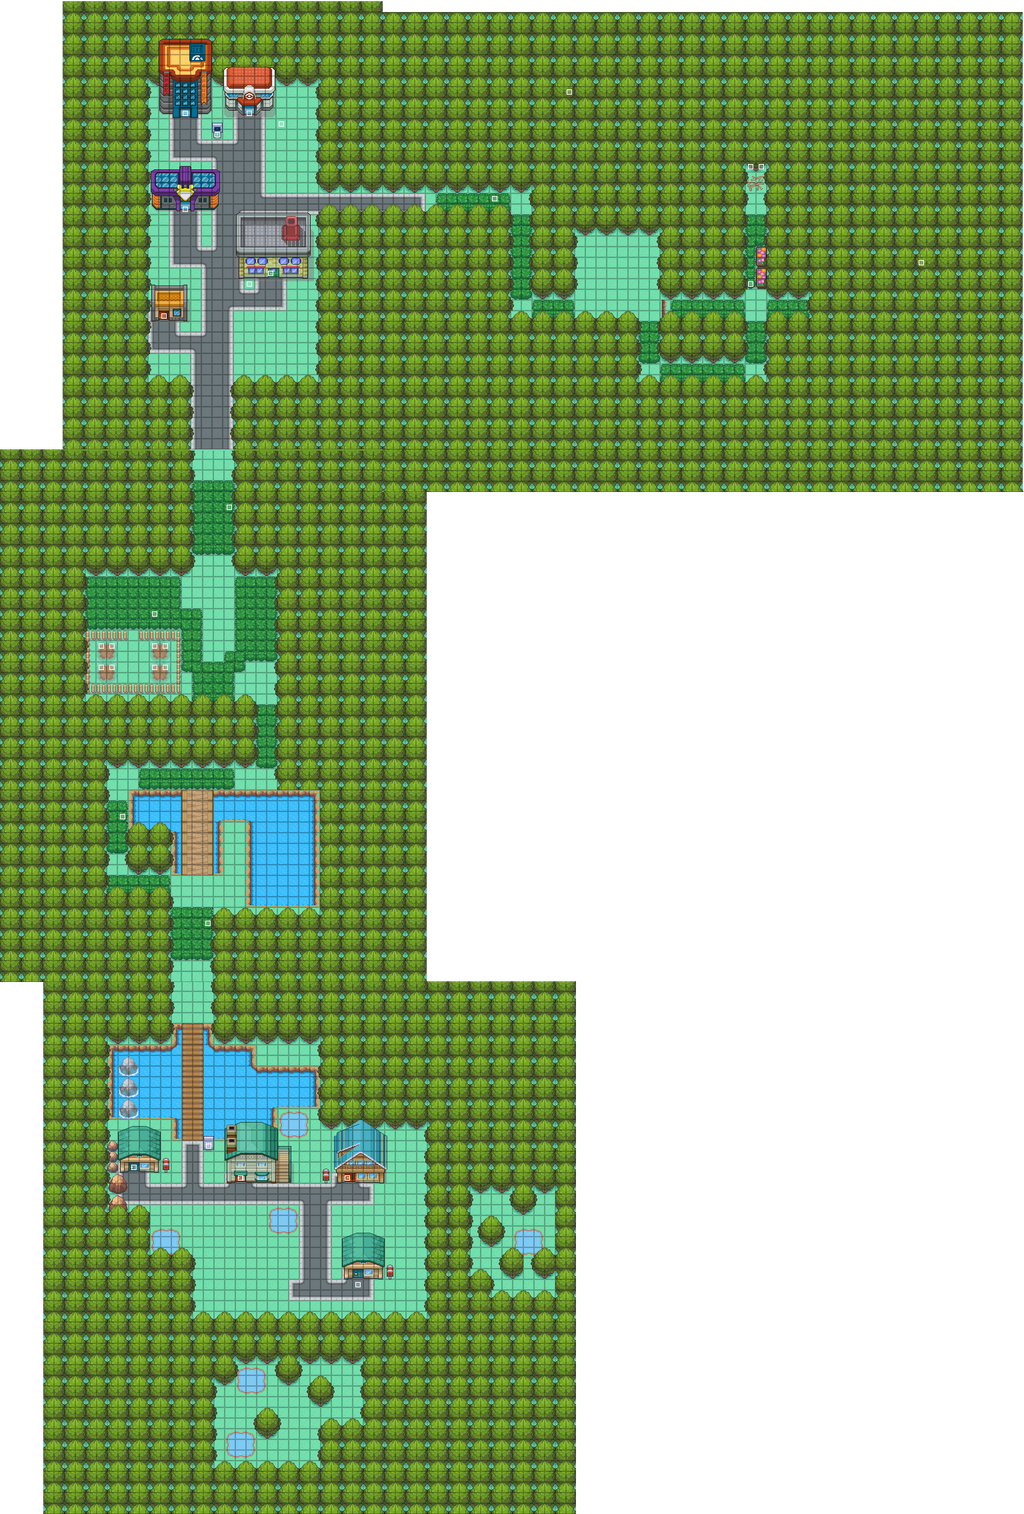 pokemon_solaris___first_bits_of_the_solaris_region_by_mateidobrescu-d65h8eb.png